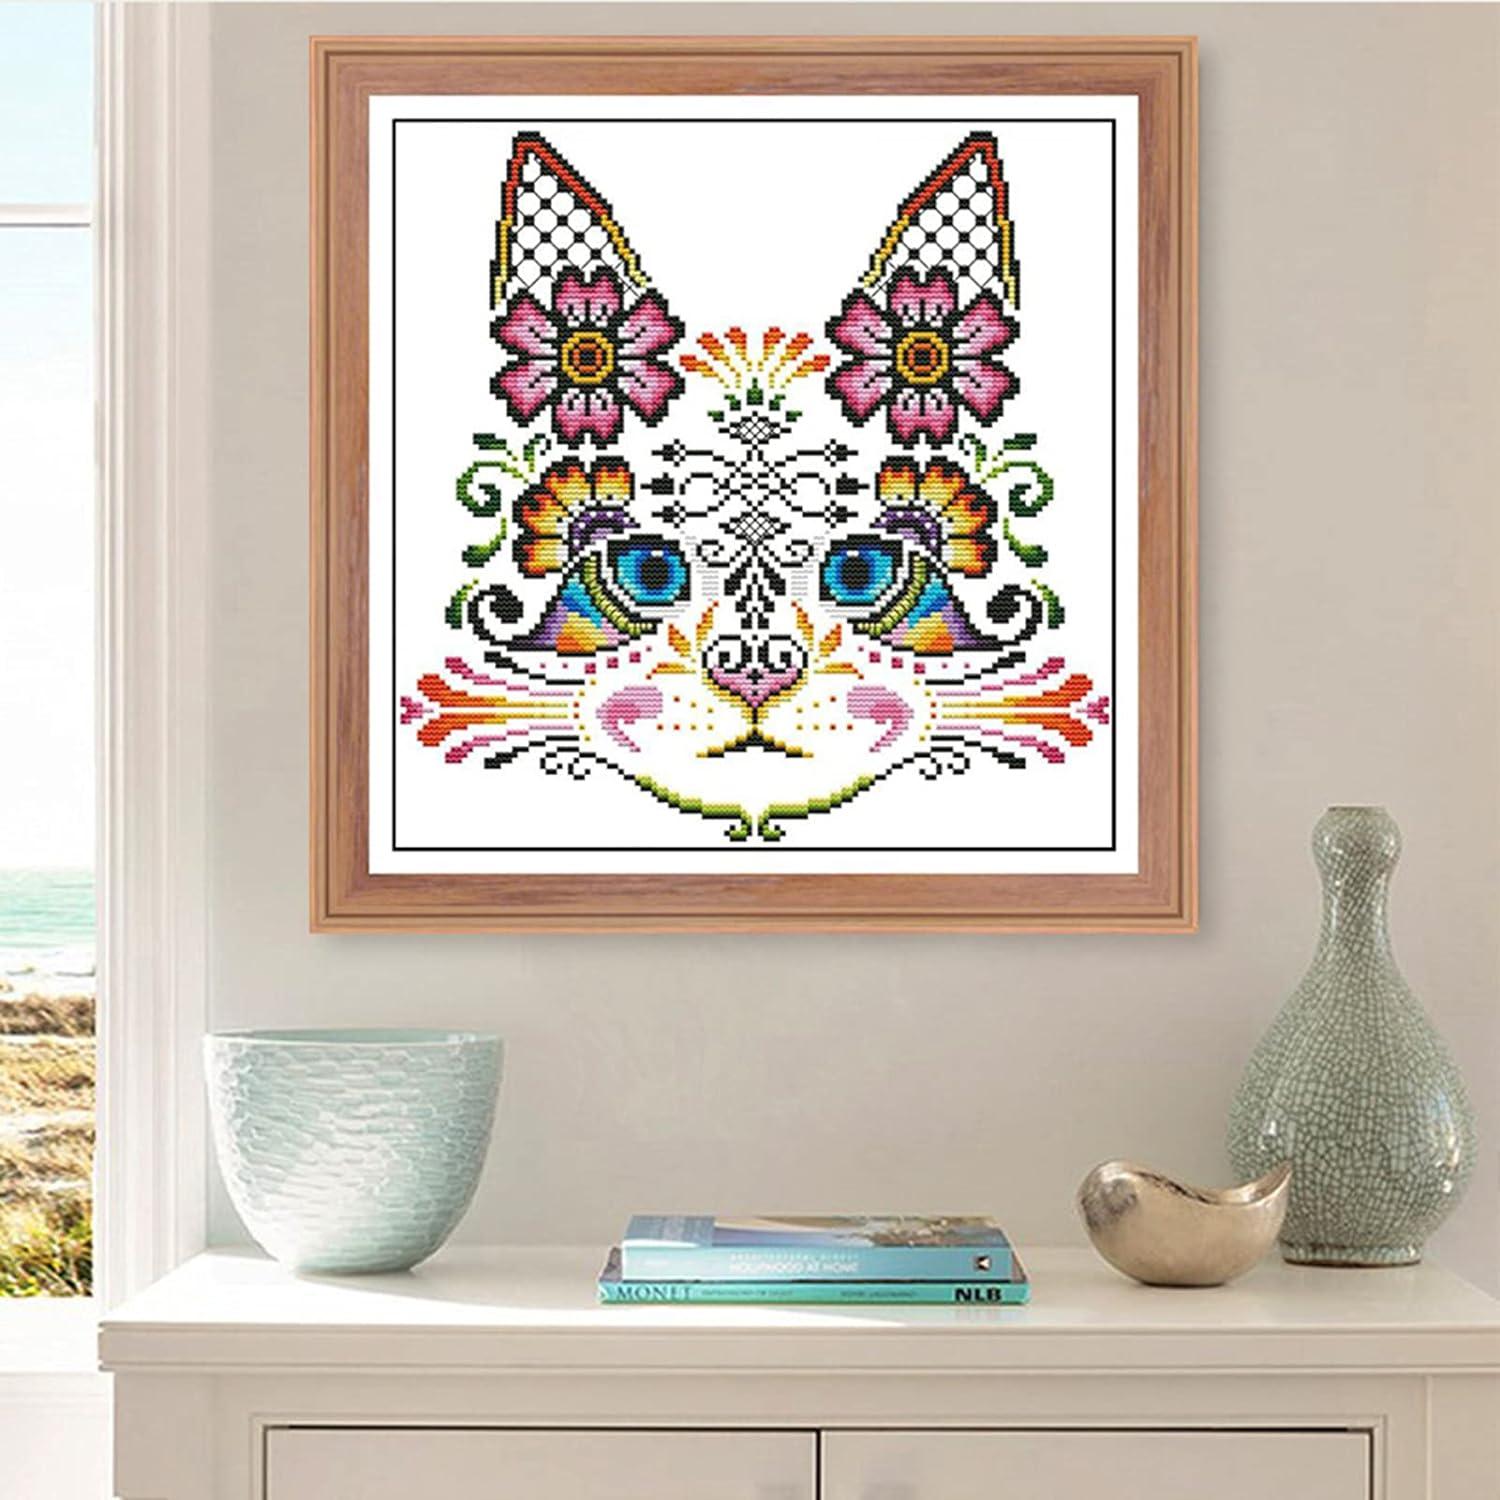  51buyoutgo Flower & Cat Cross Stitch Kits for Adults, 11 ct  Easy Funny Pre Printed Stamped Counted Cross Stitch Patterns Kits for  Adults Beginners Kids, Embroidery Starter Kits for Beginners 46x36